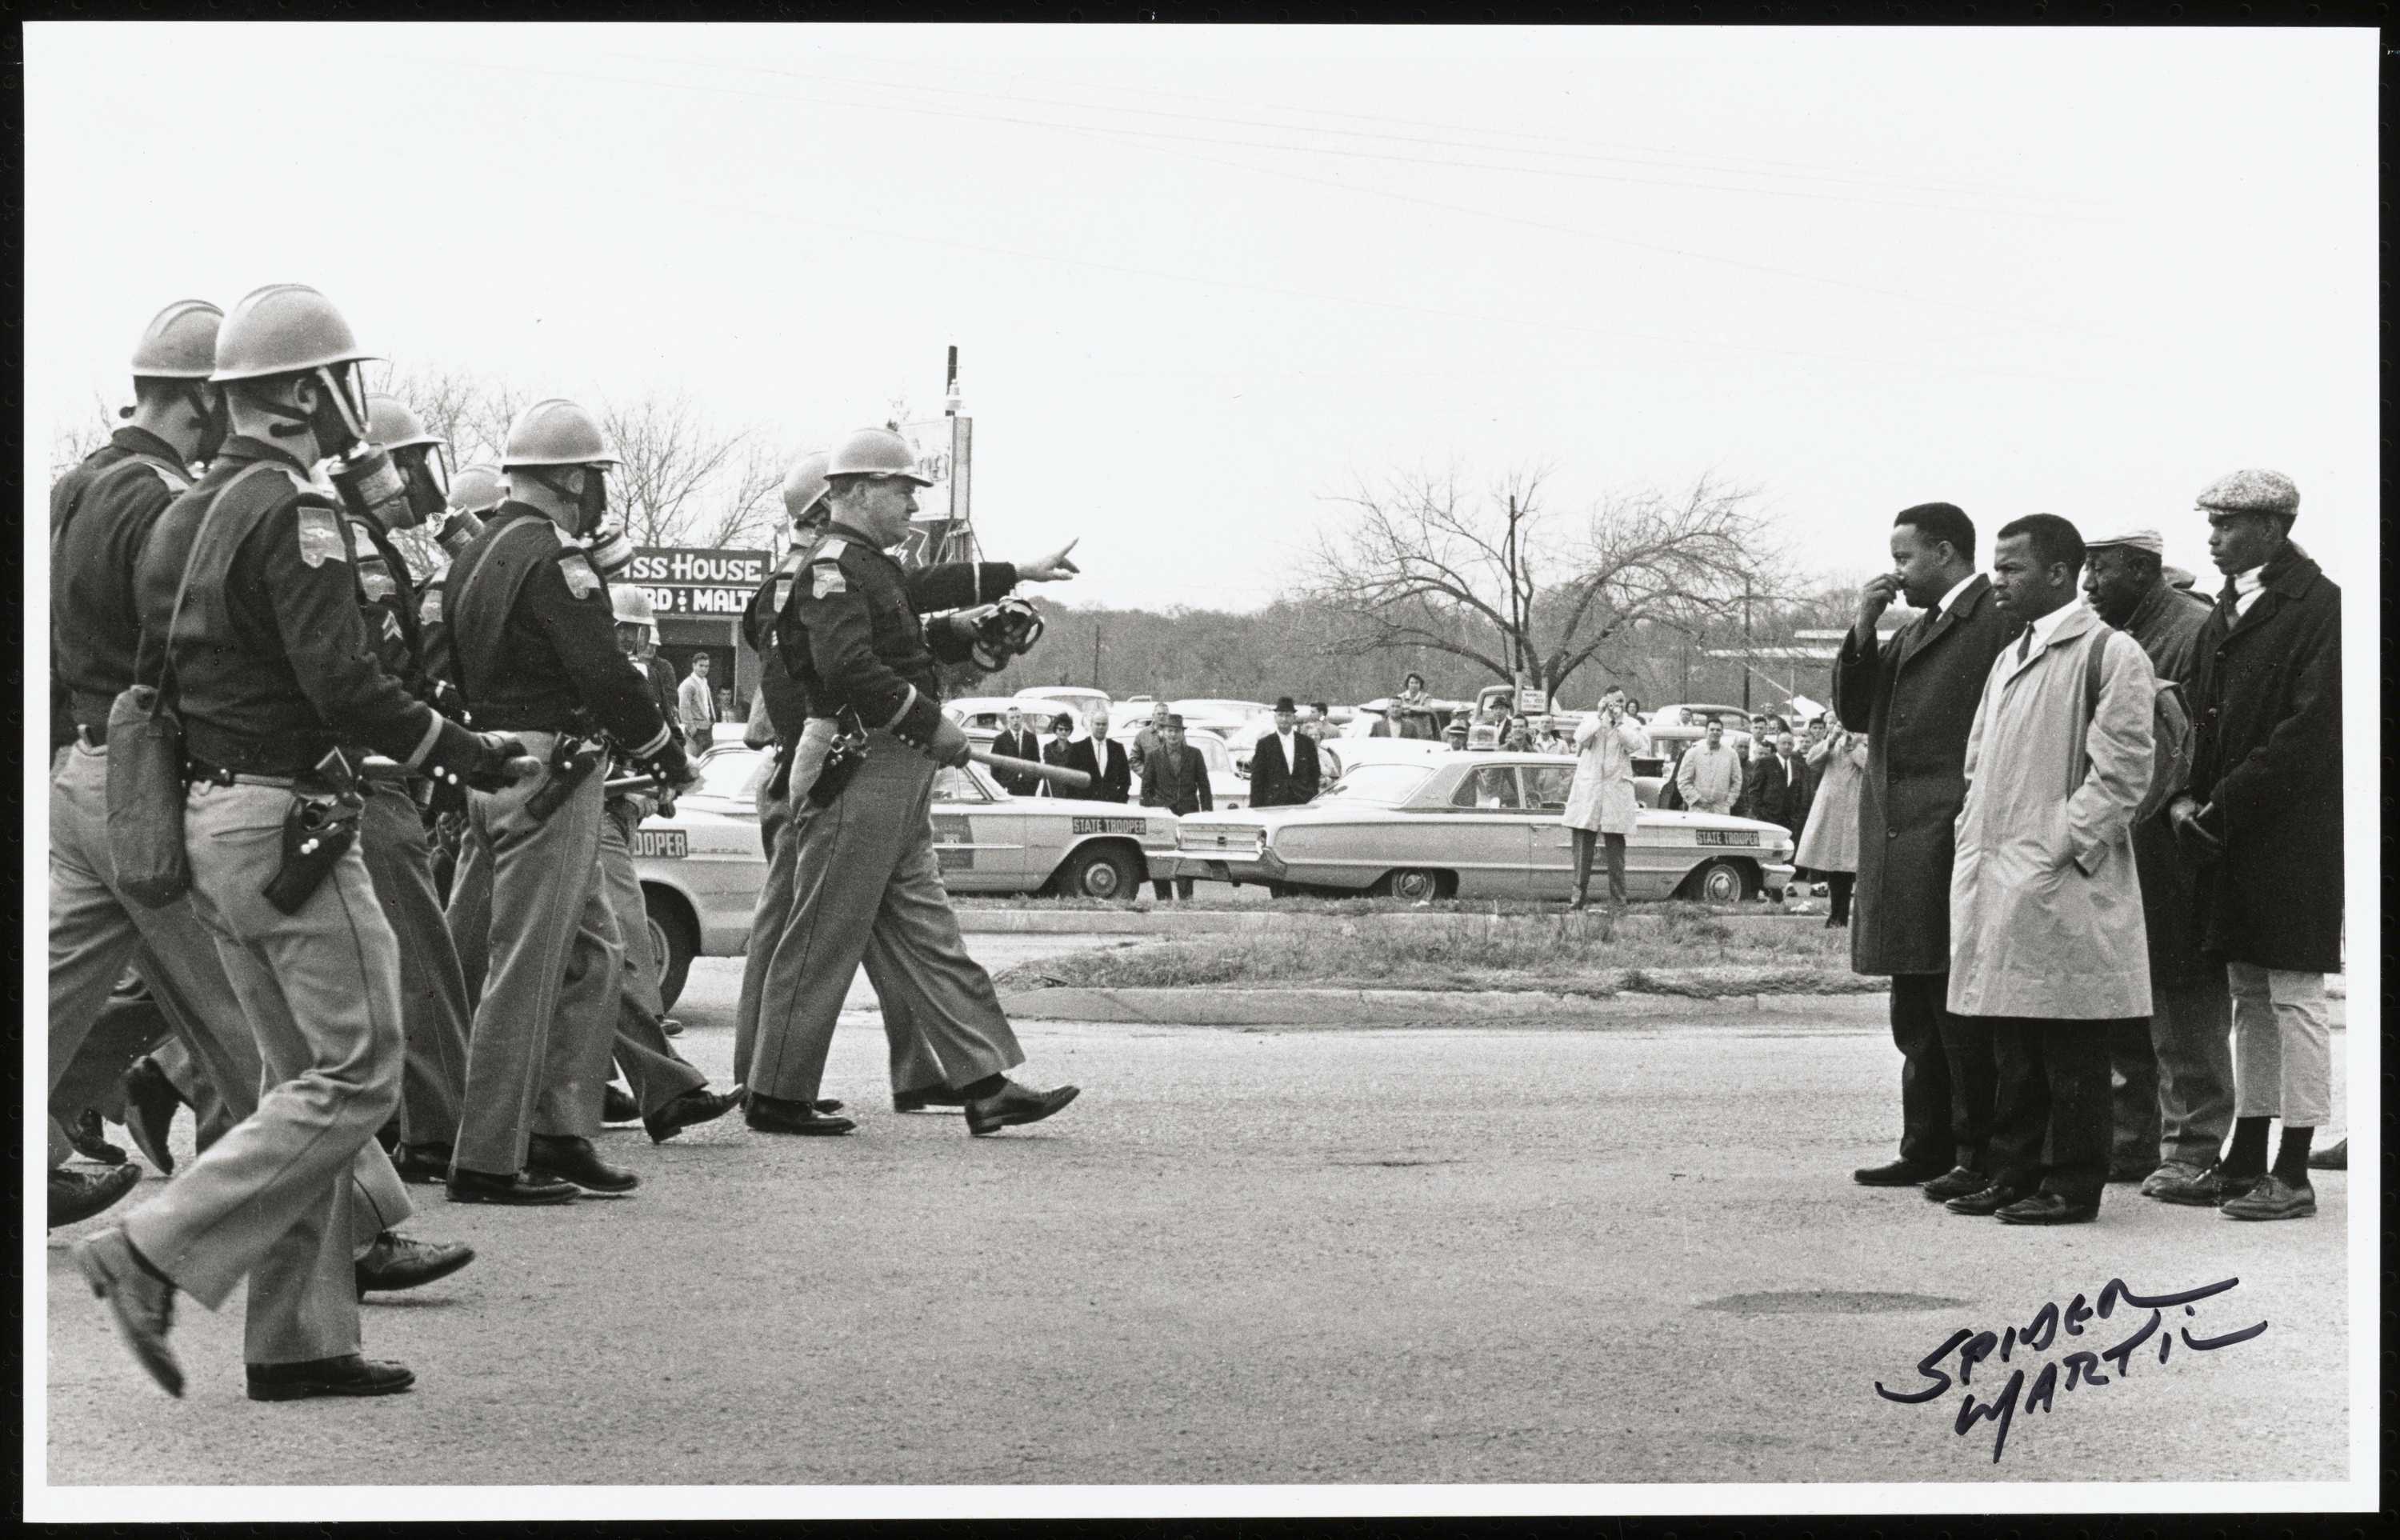 A black-and-white photograph of Alabama police officers approaching Civil Rights marchers. White onlookers can be seen in the background between the two groups. This photograph may be a prelude to 2011.14.5.